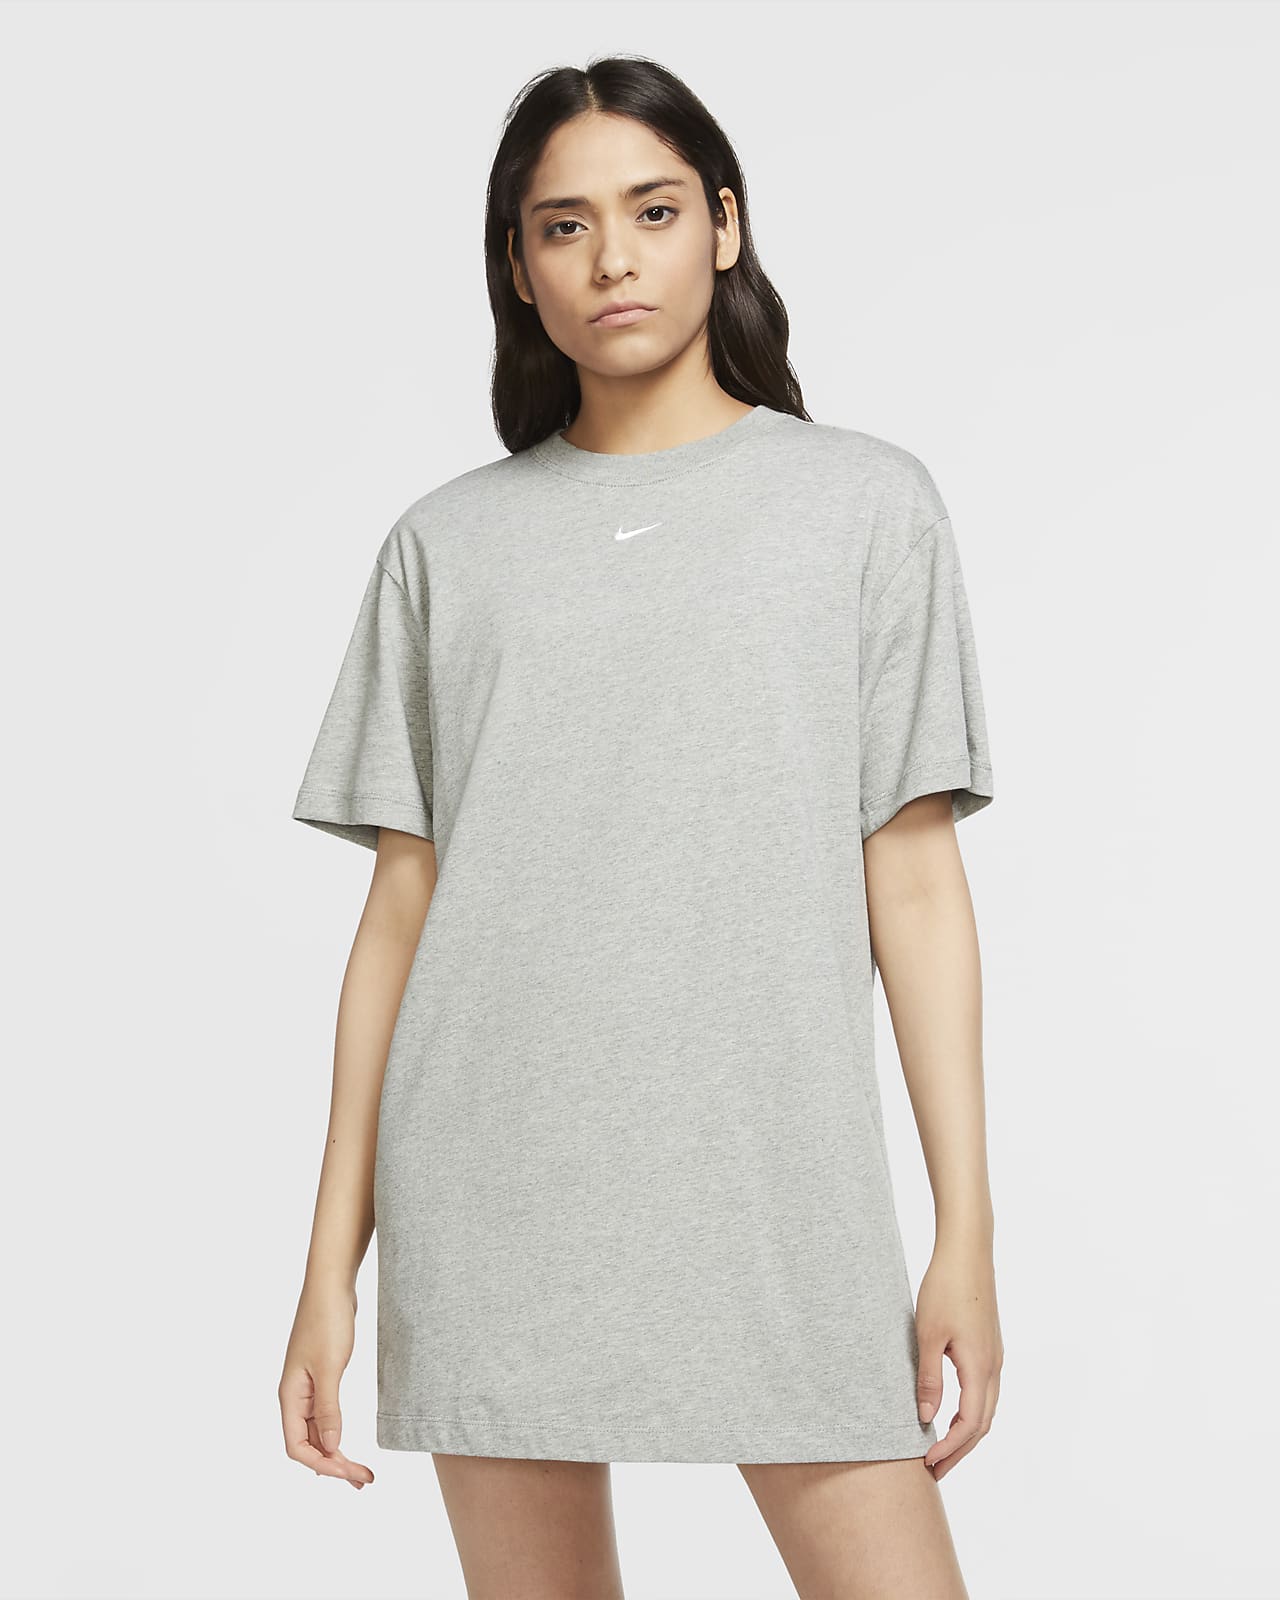 Nike Essential T Shirt Dress Outlet ...